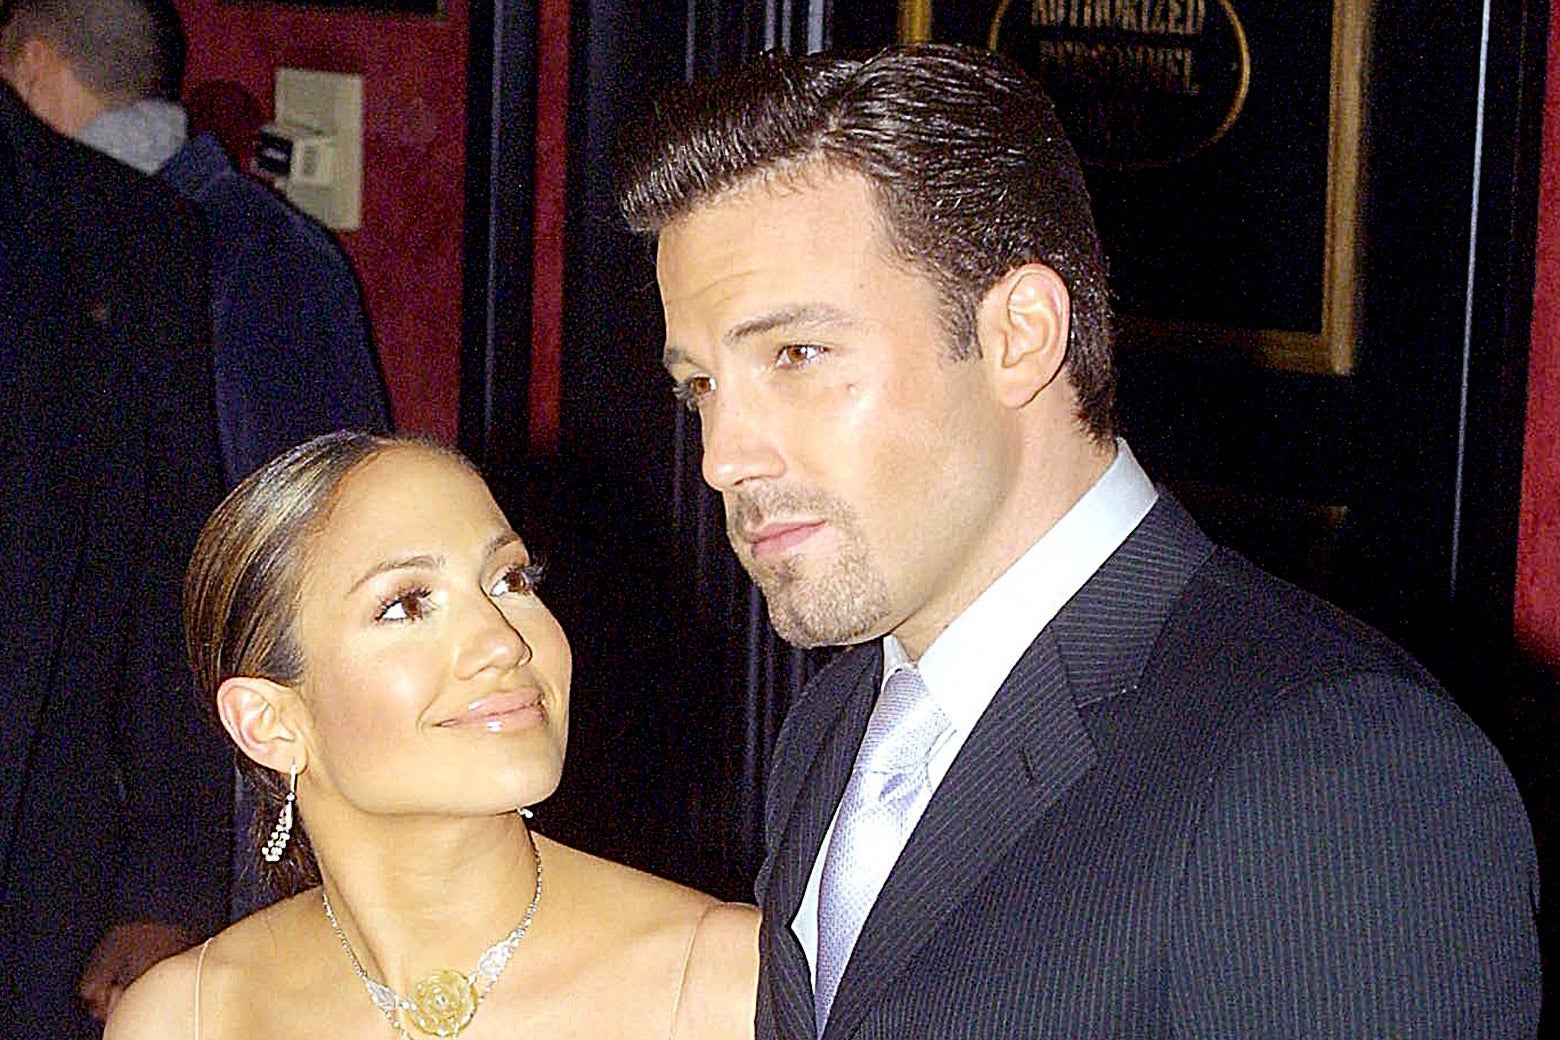 Jennifer Lopez and Ben Affleck at the Maid in Manhattan premiere in 2002.